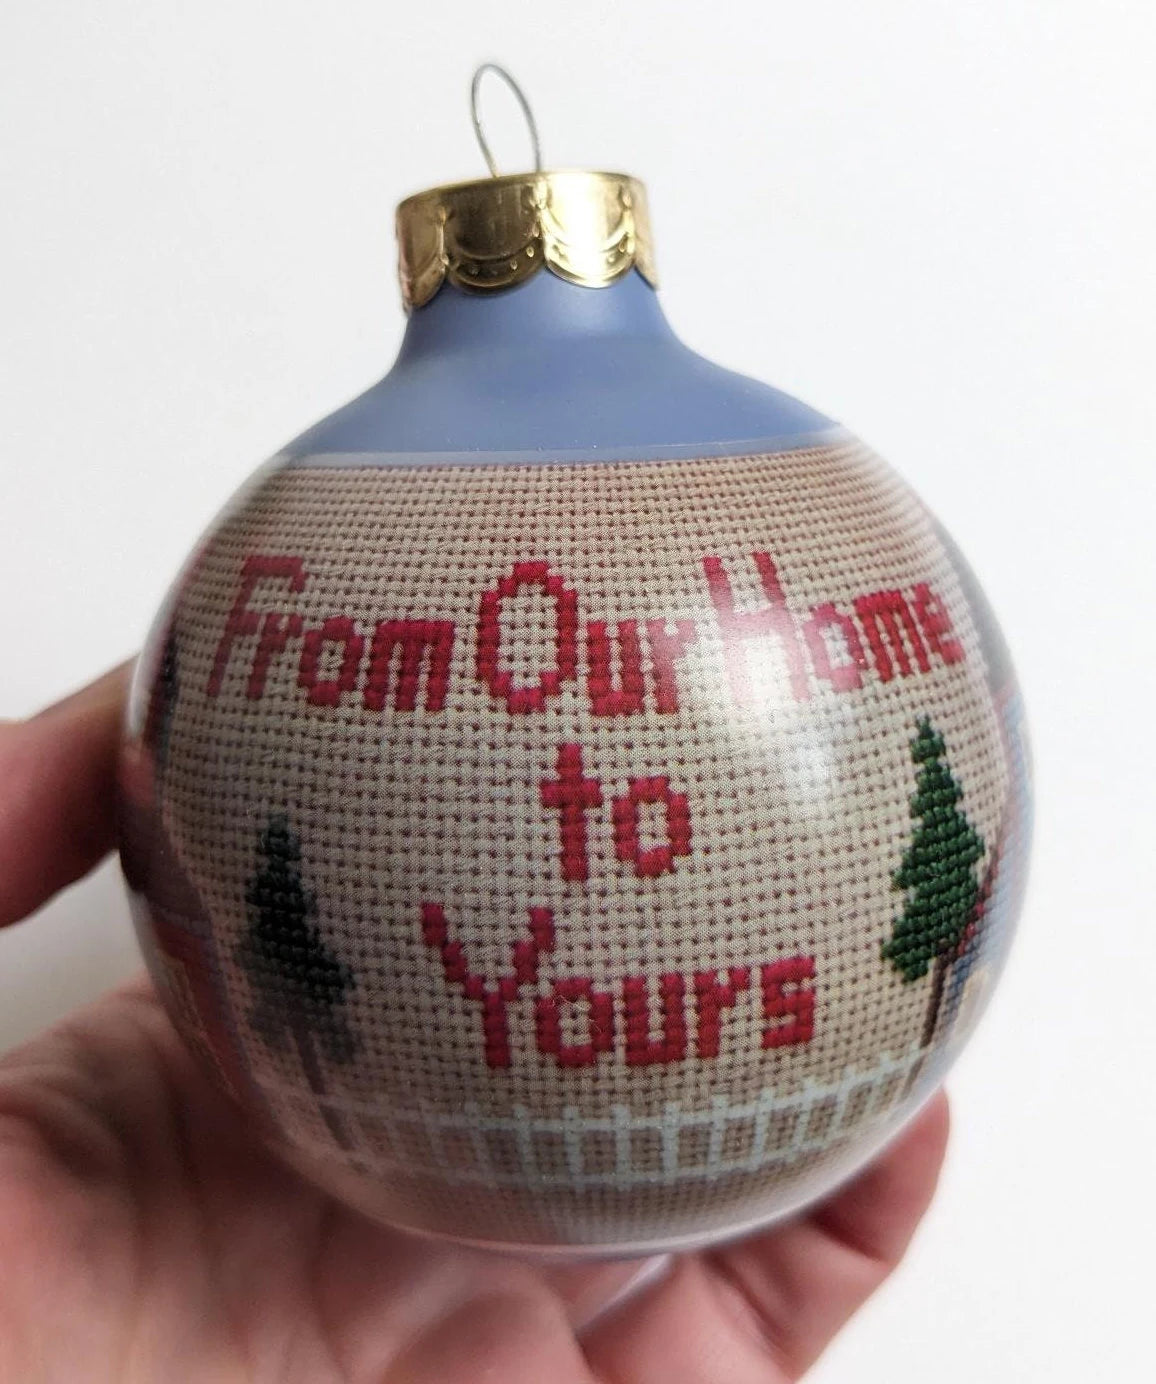 'From Our Home to Yours' Christmas Ornament